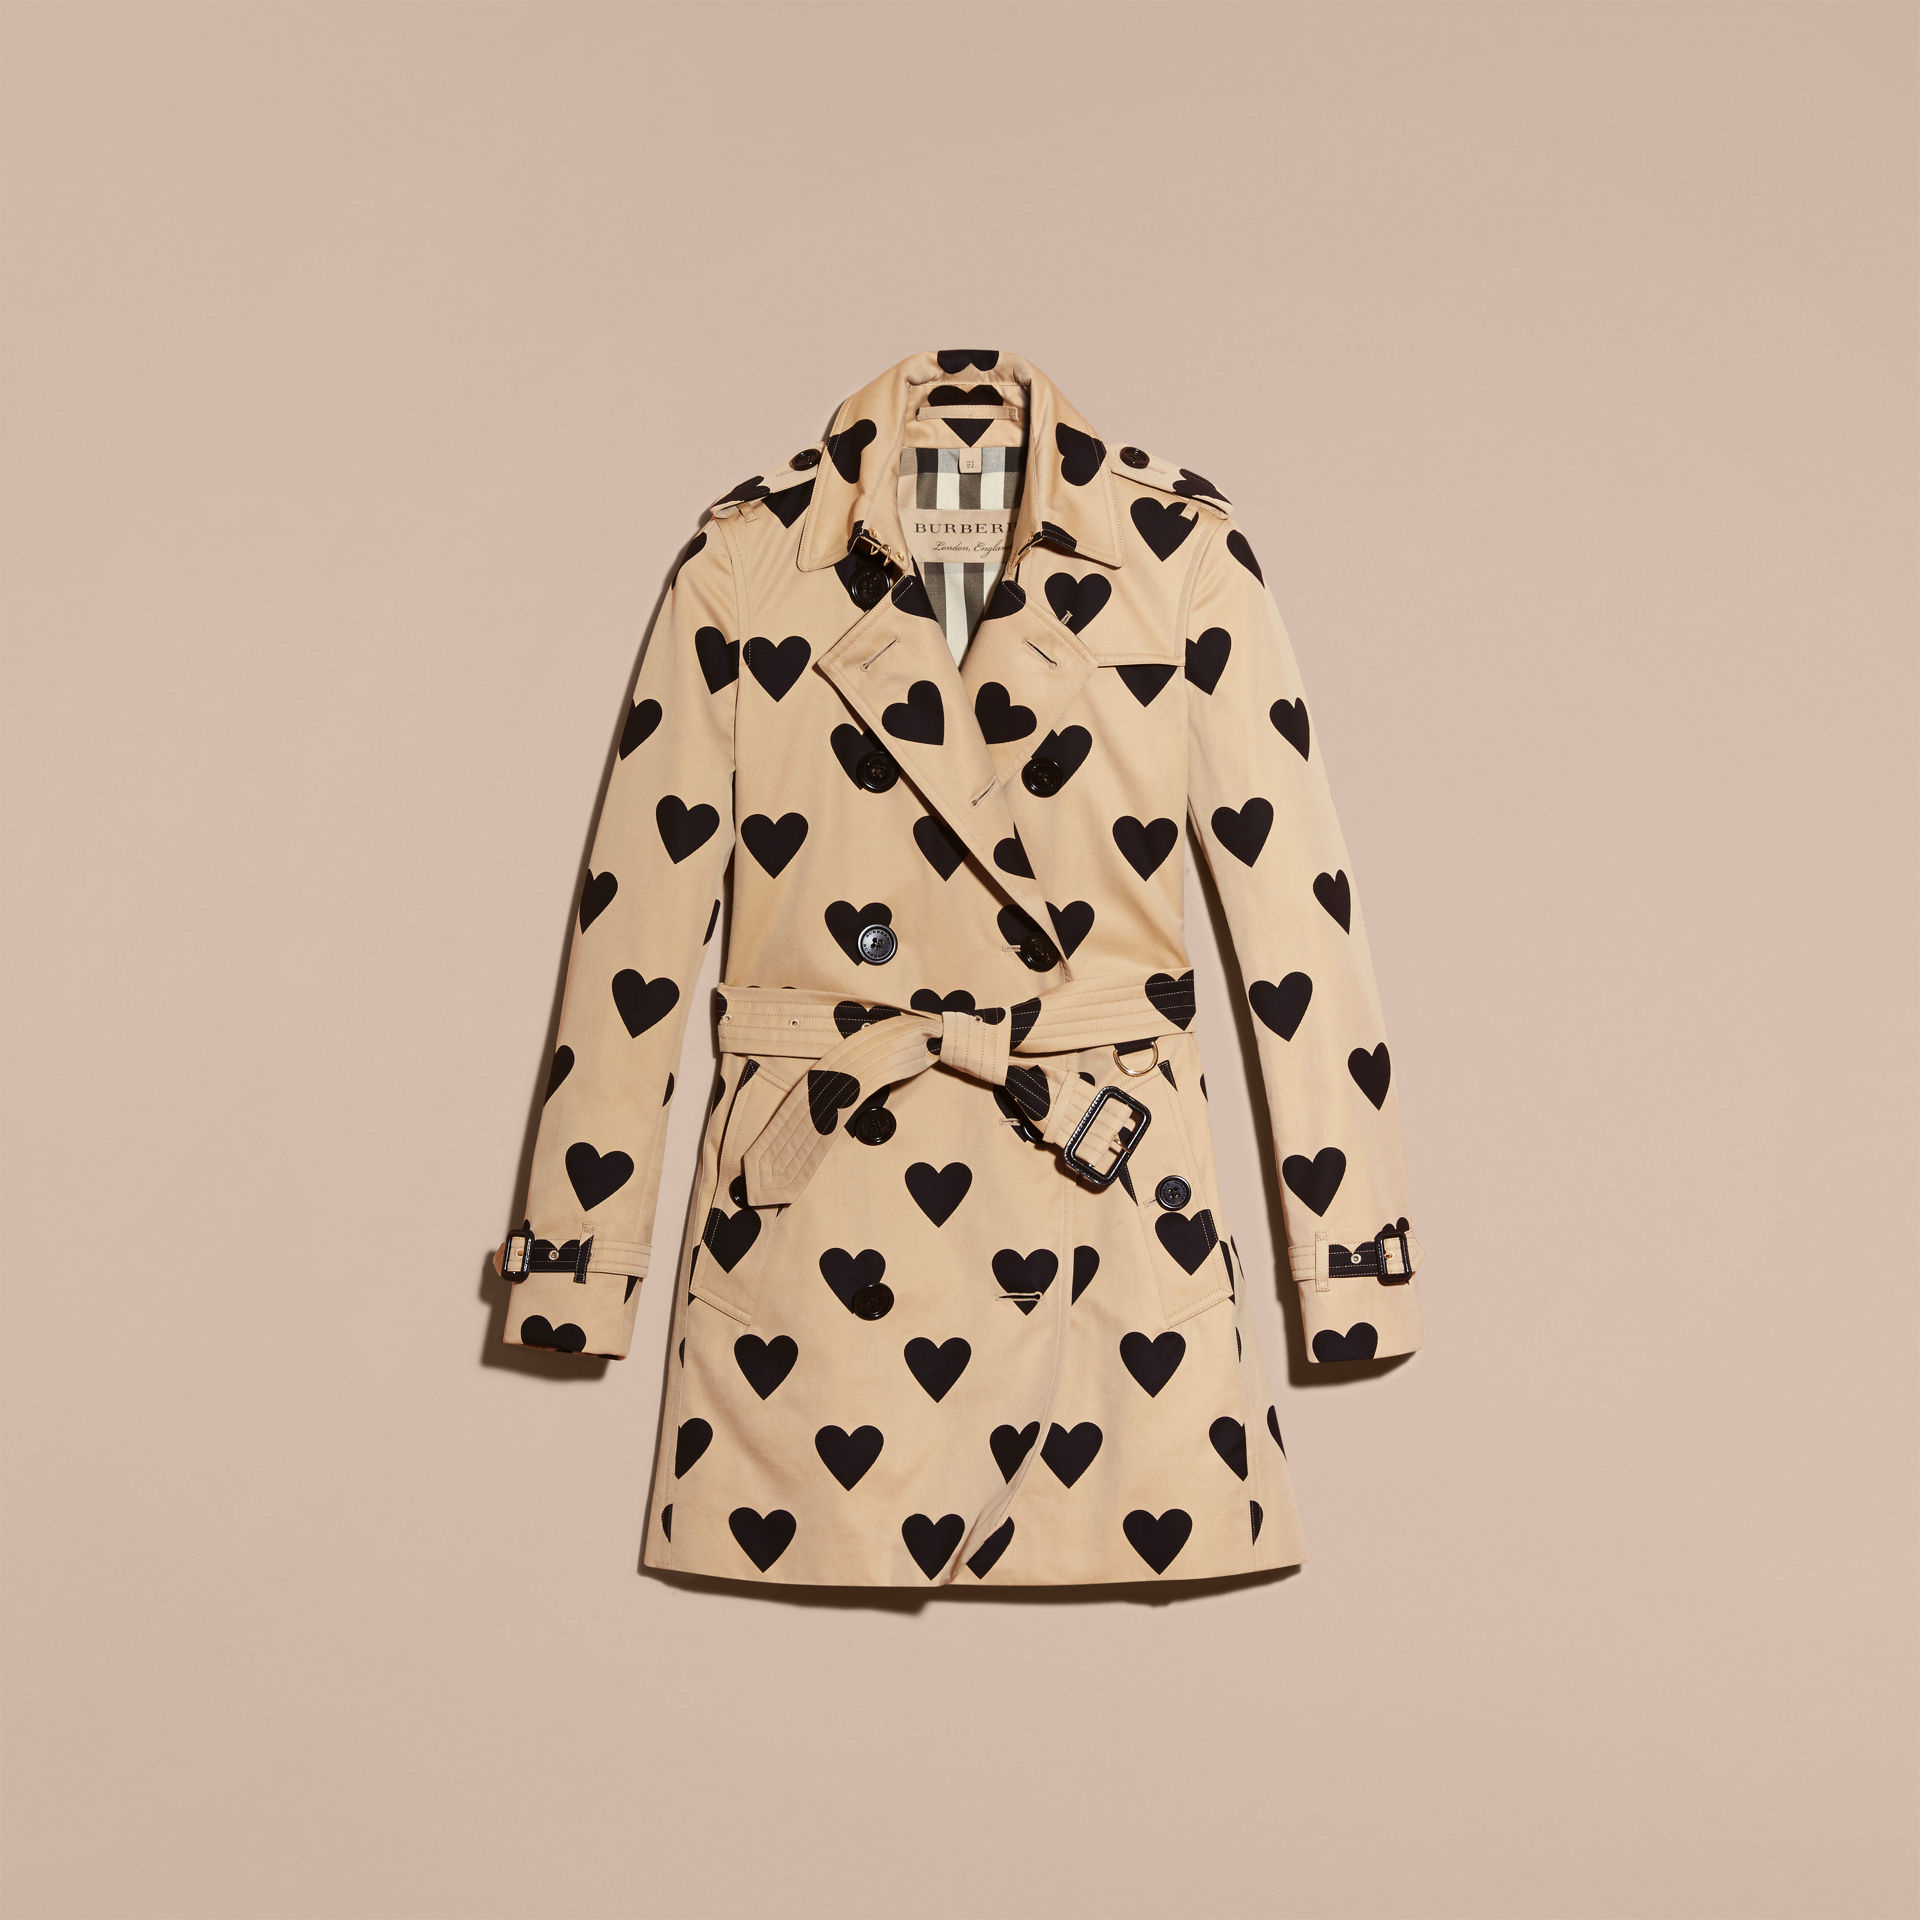 Burberry Heart Print Cotton Trench Coat in Black | Lyst